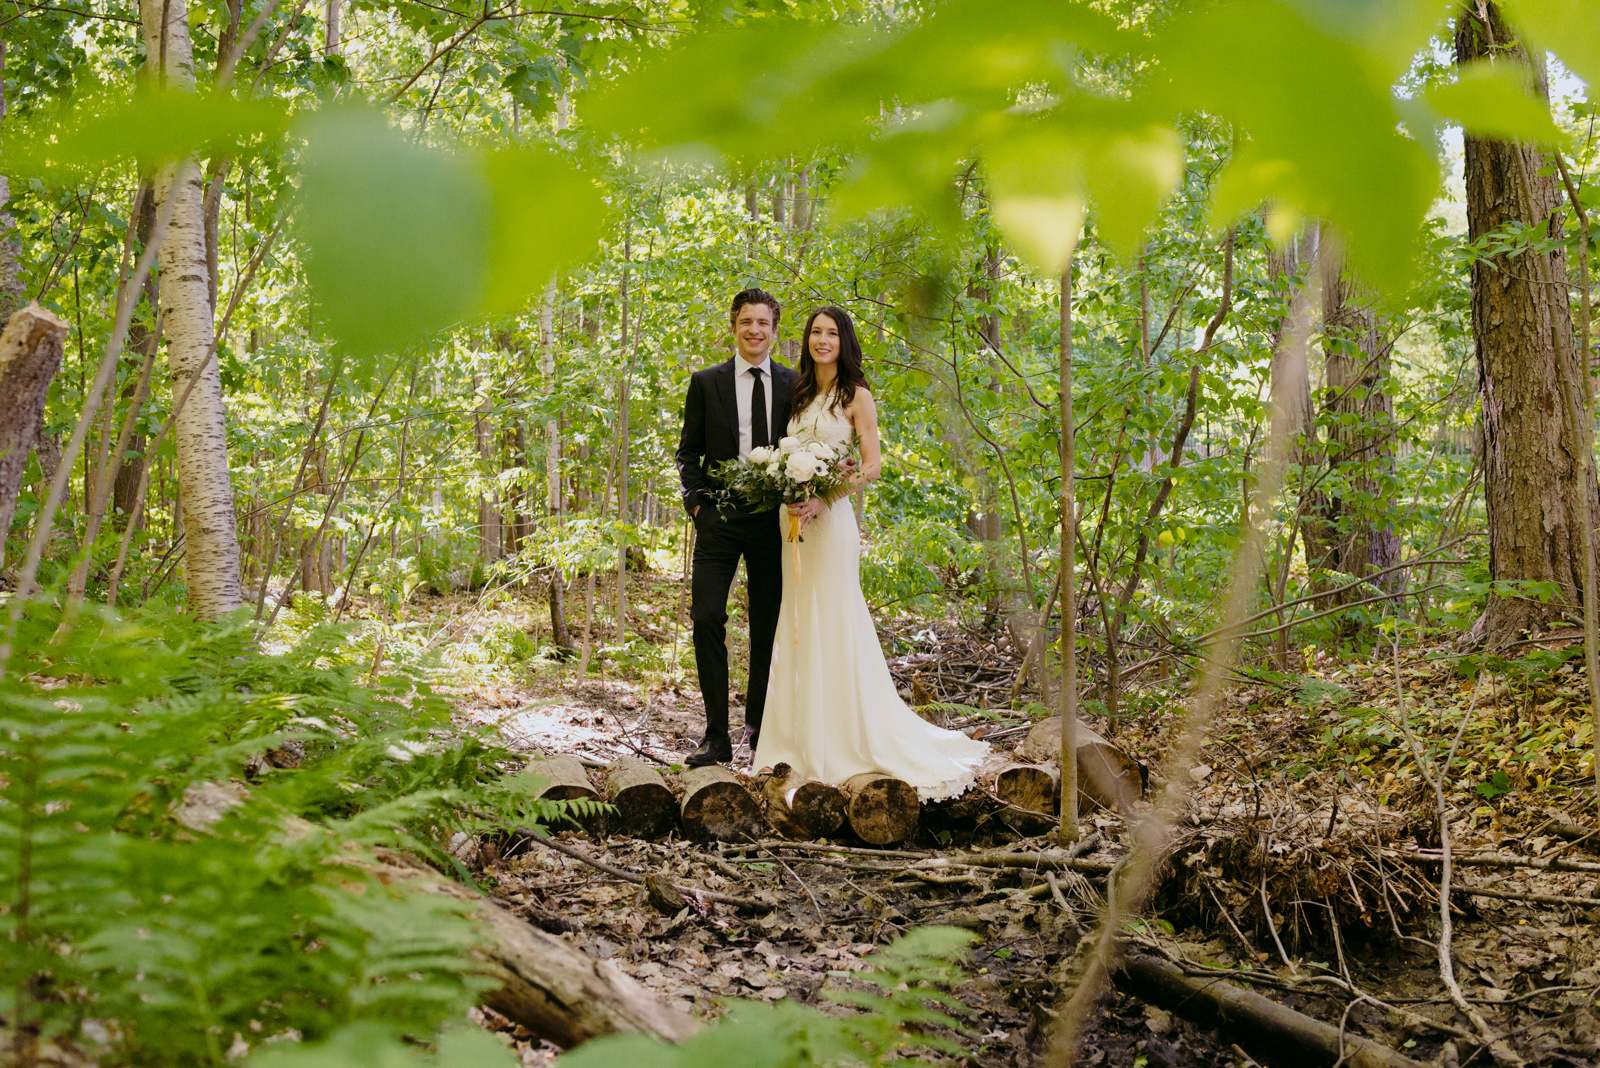 bride and groom standing on wooden logs in a forest smiling at the camera